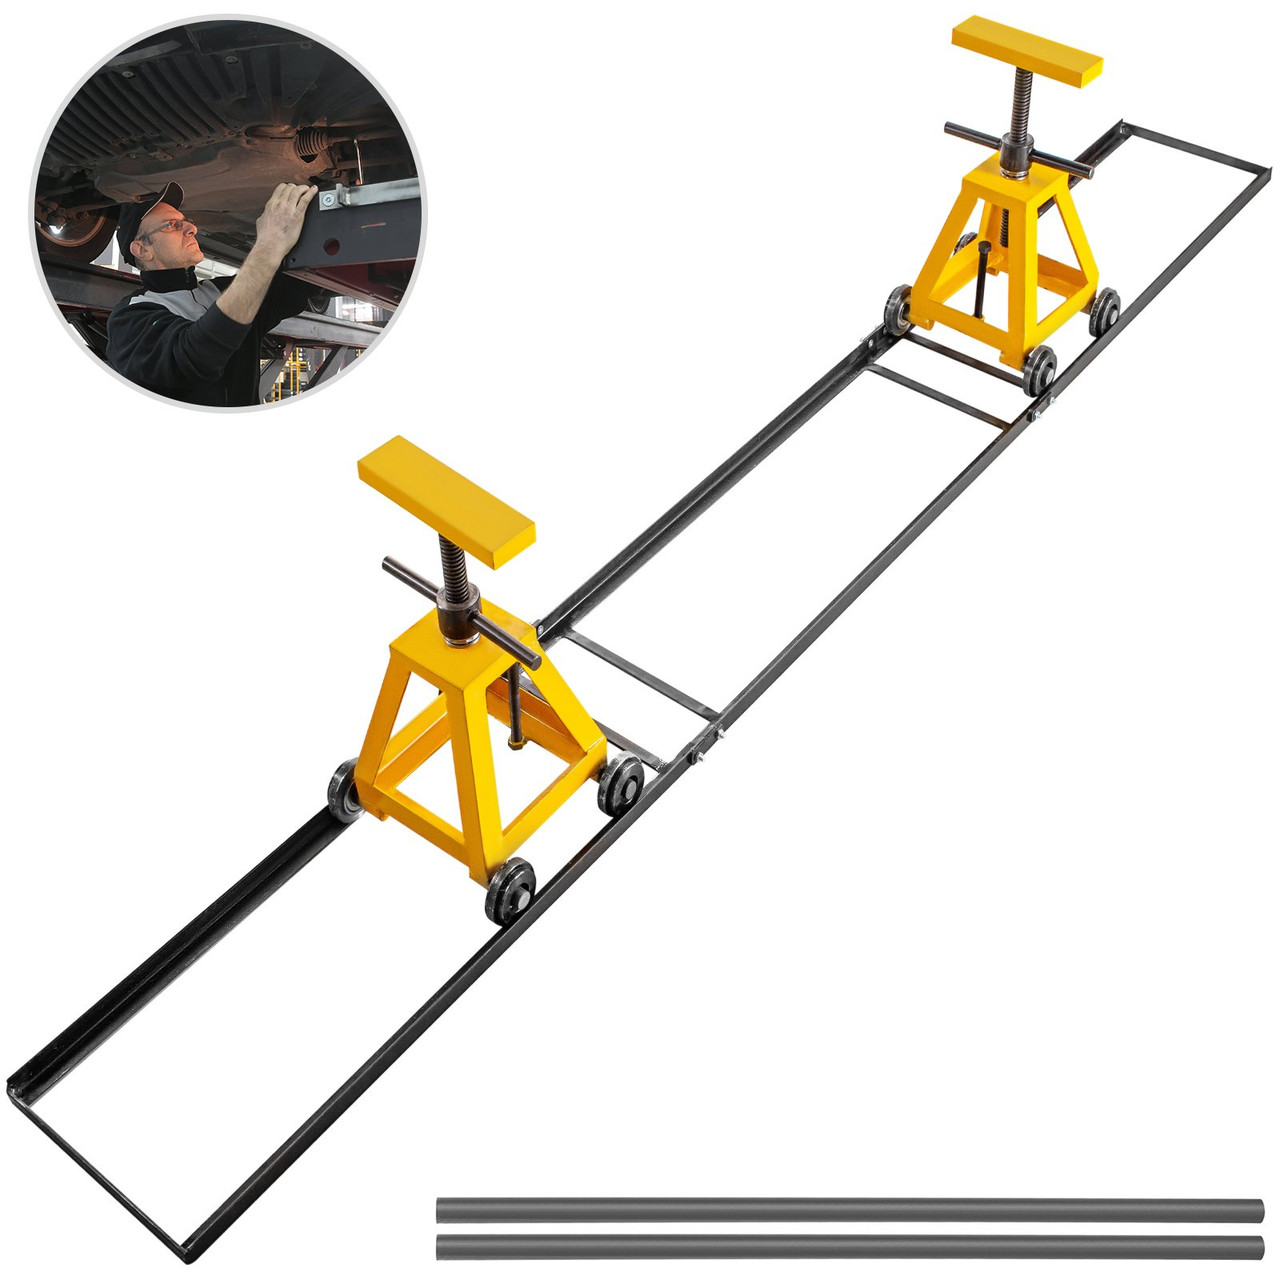 Tractor Splitting Rail 10, 000LBS, Splitting Stand for Tractor 118-Inch Length, Tractor Separator with Rails, Splitting Rails Kit, w/ 2 Jack Stands and 2 Adjustable Handles, Support Equipment